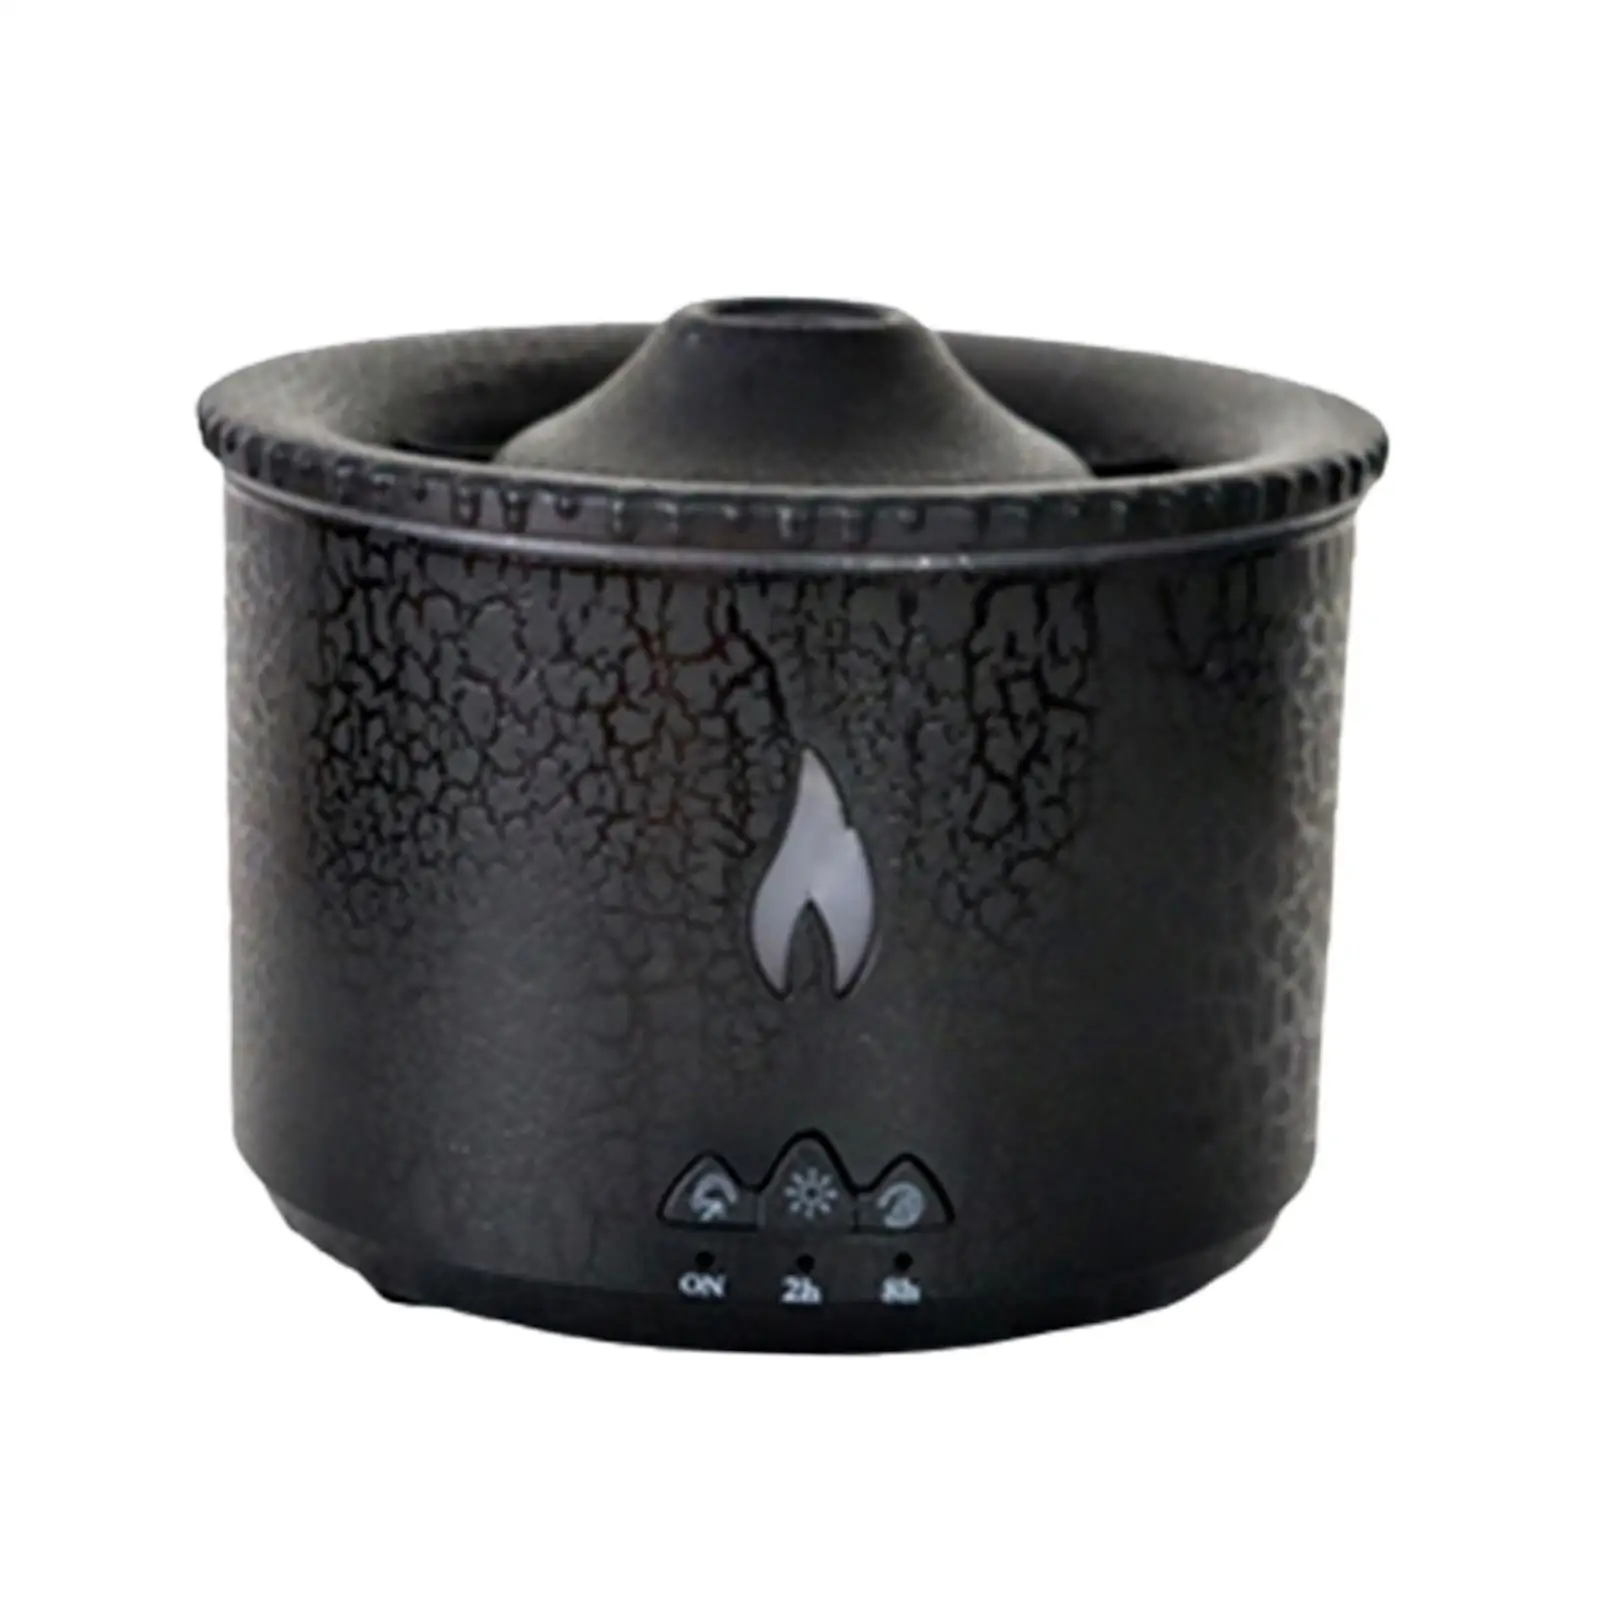 

Flame Air Humidifier Low Noise Auto Shut Off Simulation Flame Aroma Diffuser for Tabletop Personal Living Room Nursery Desktop